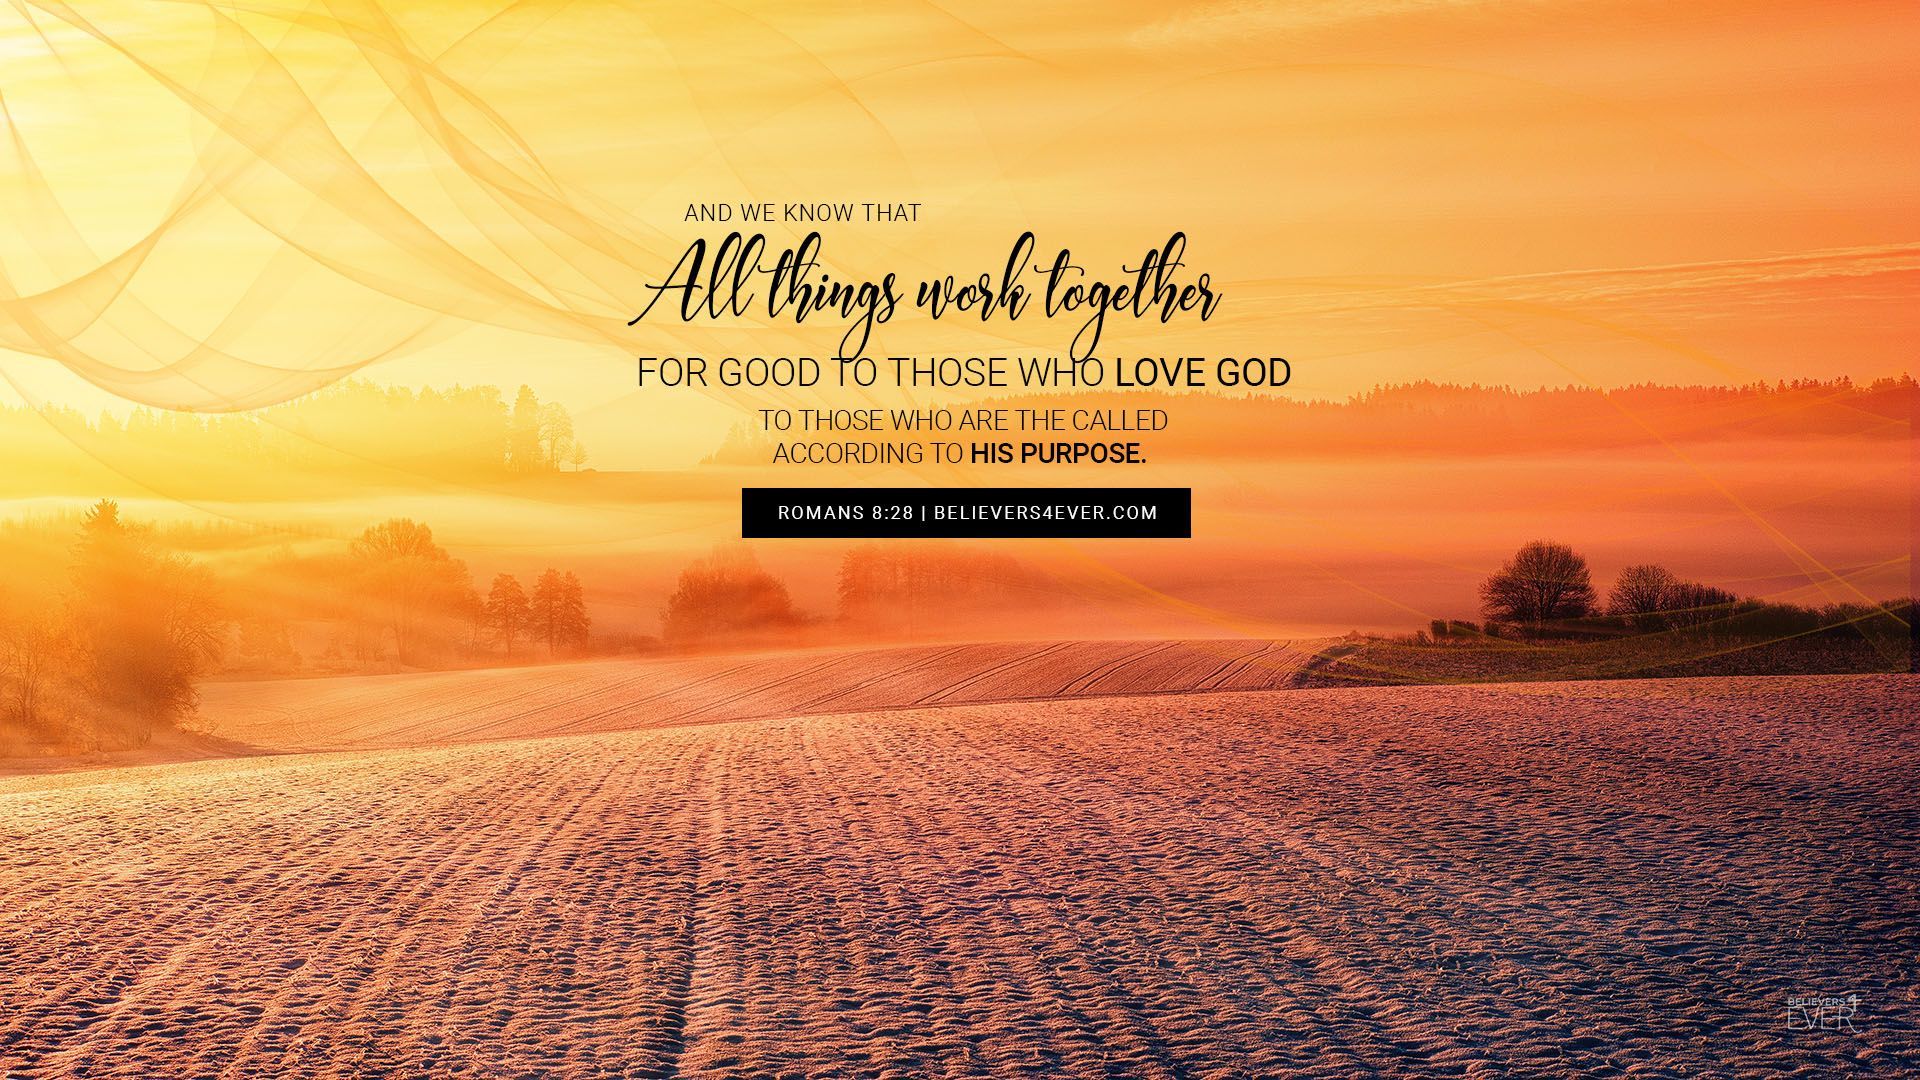 All things work together.com. All things work together, Bible quotes wallpaper, Bible quotes